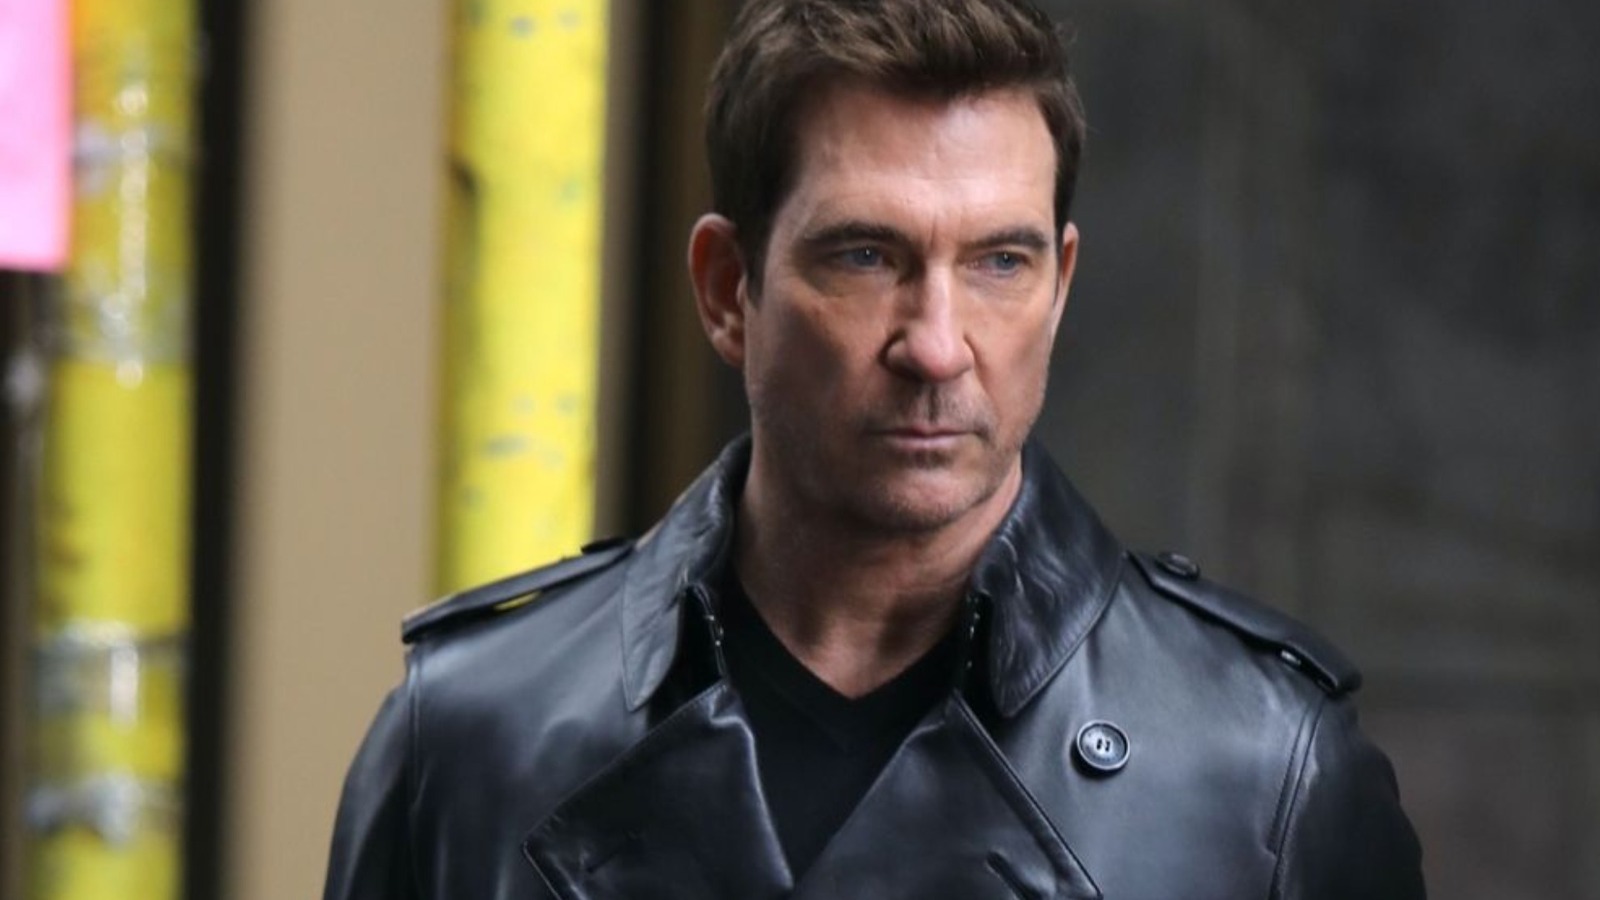 Dylan McDermott Has Conquered Law & Order, Now He's Ready For One